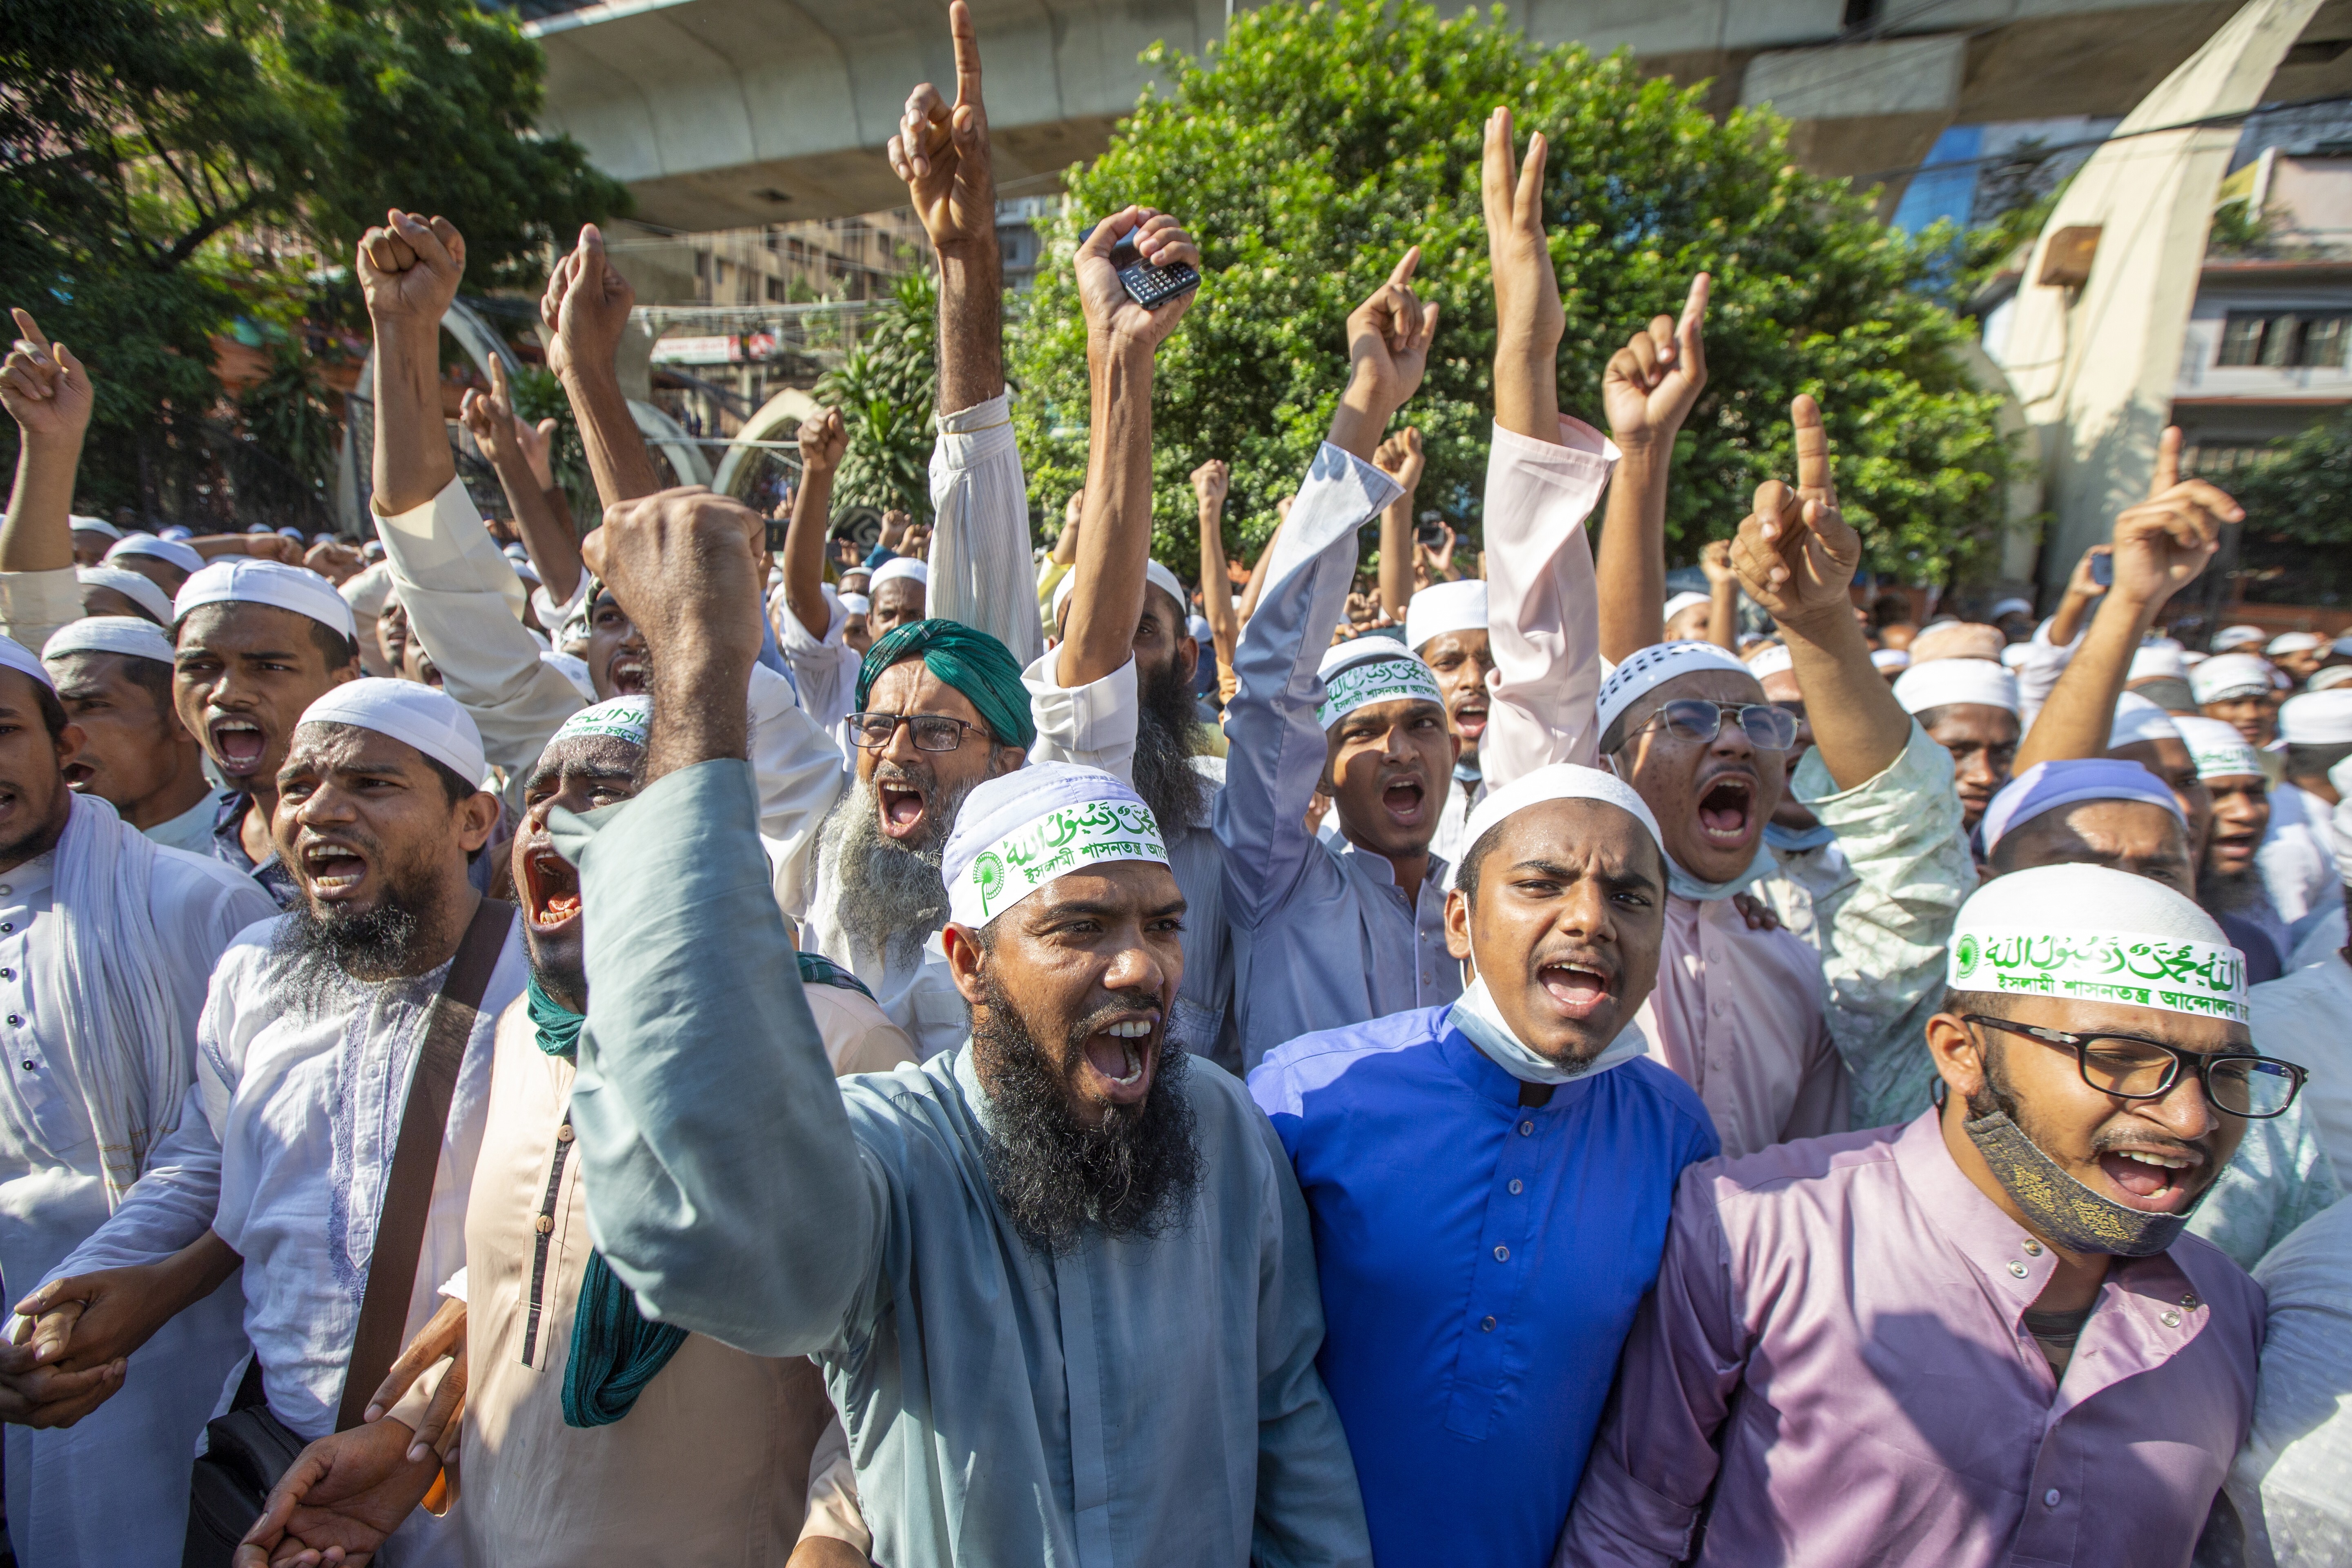 Muslims protest against the alleged desecration of the Koran in Dhaka on October 16, 2021. Photo: EPA-EFE